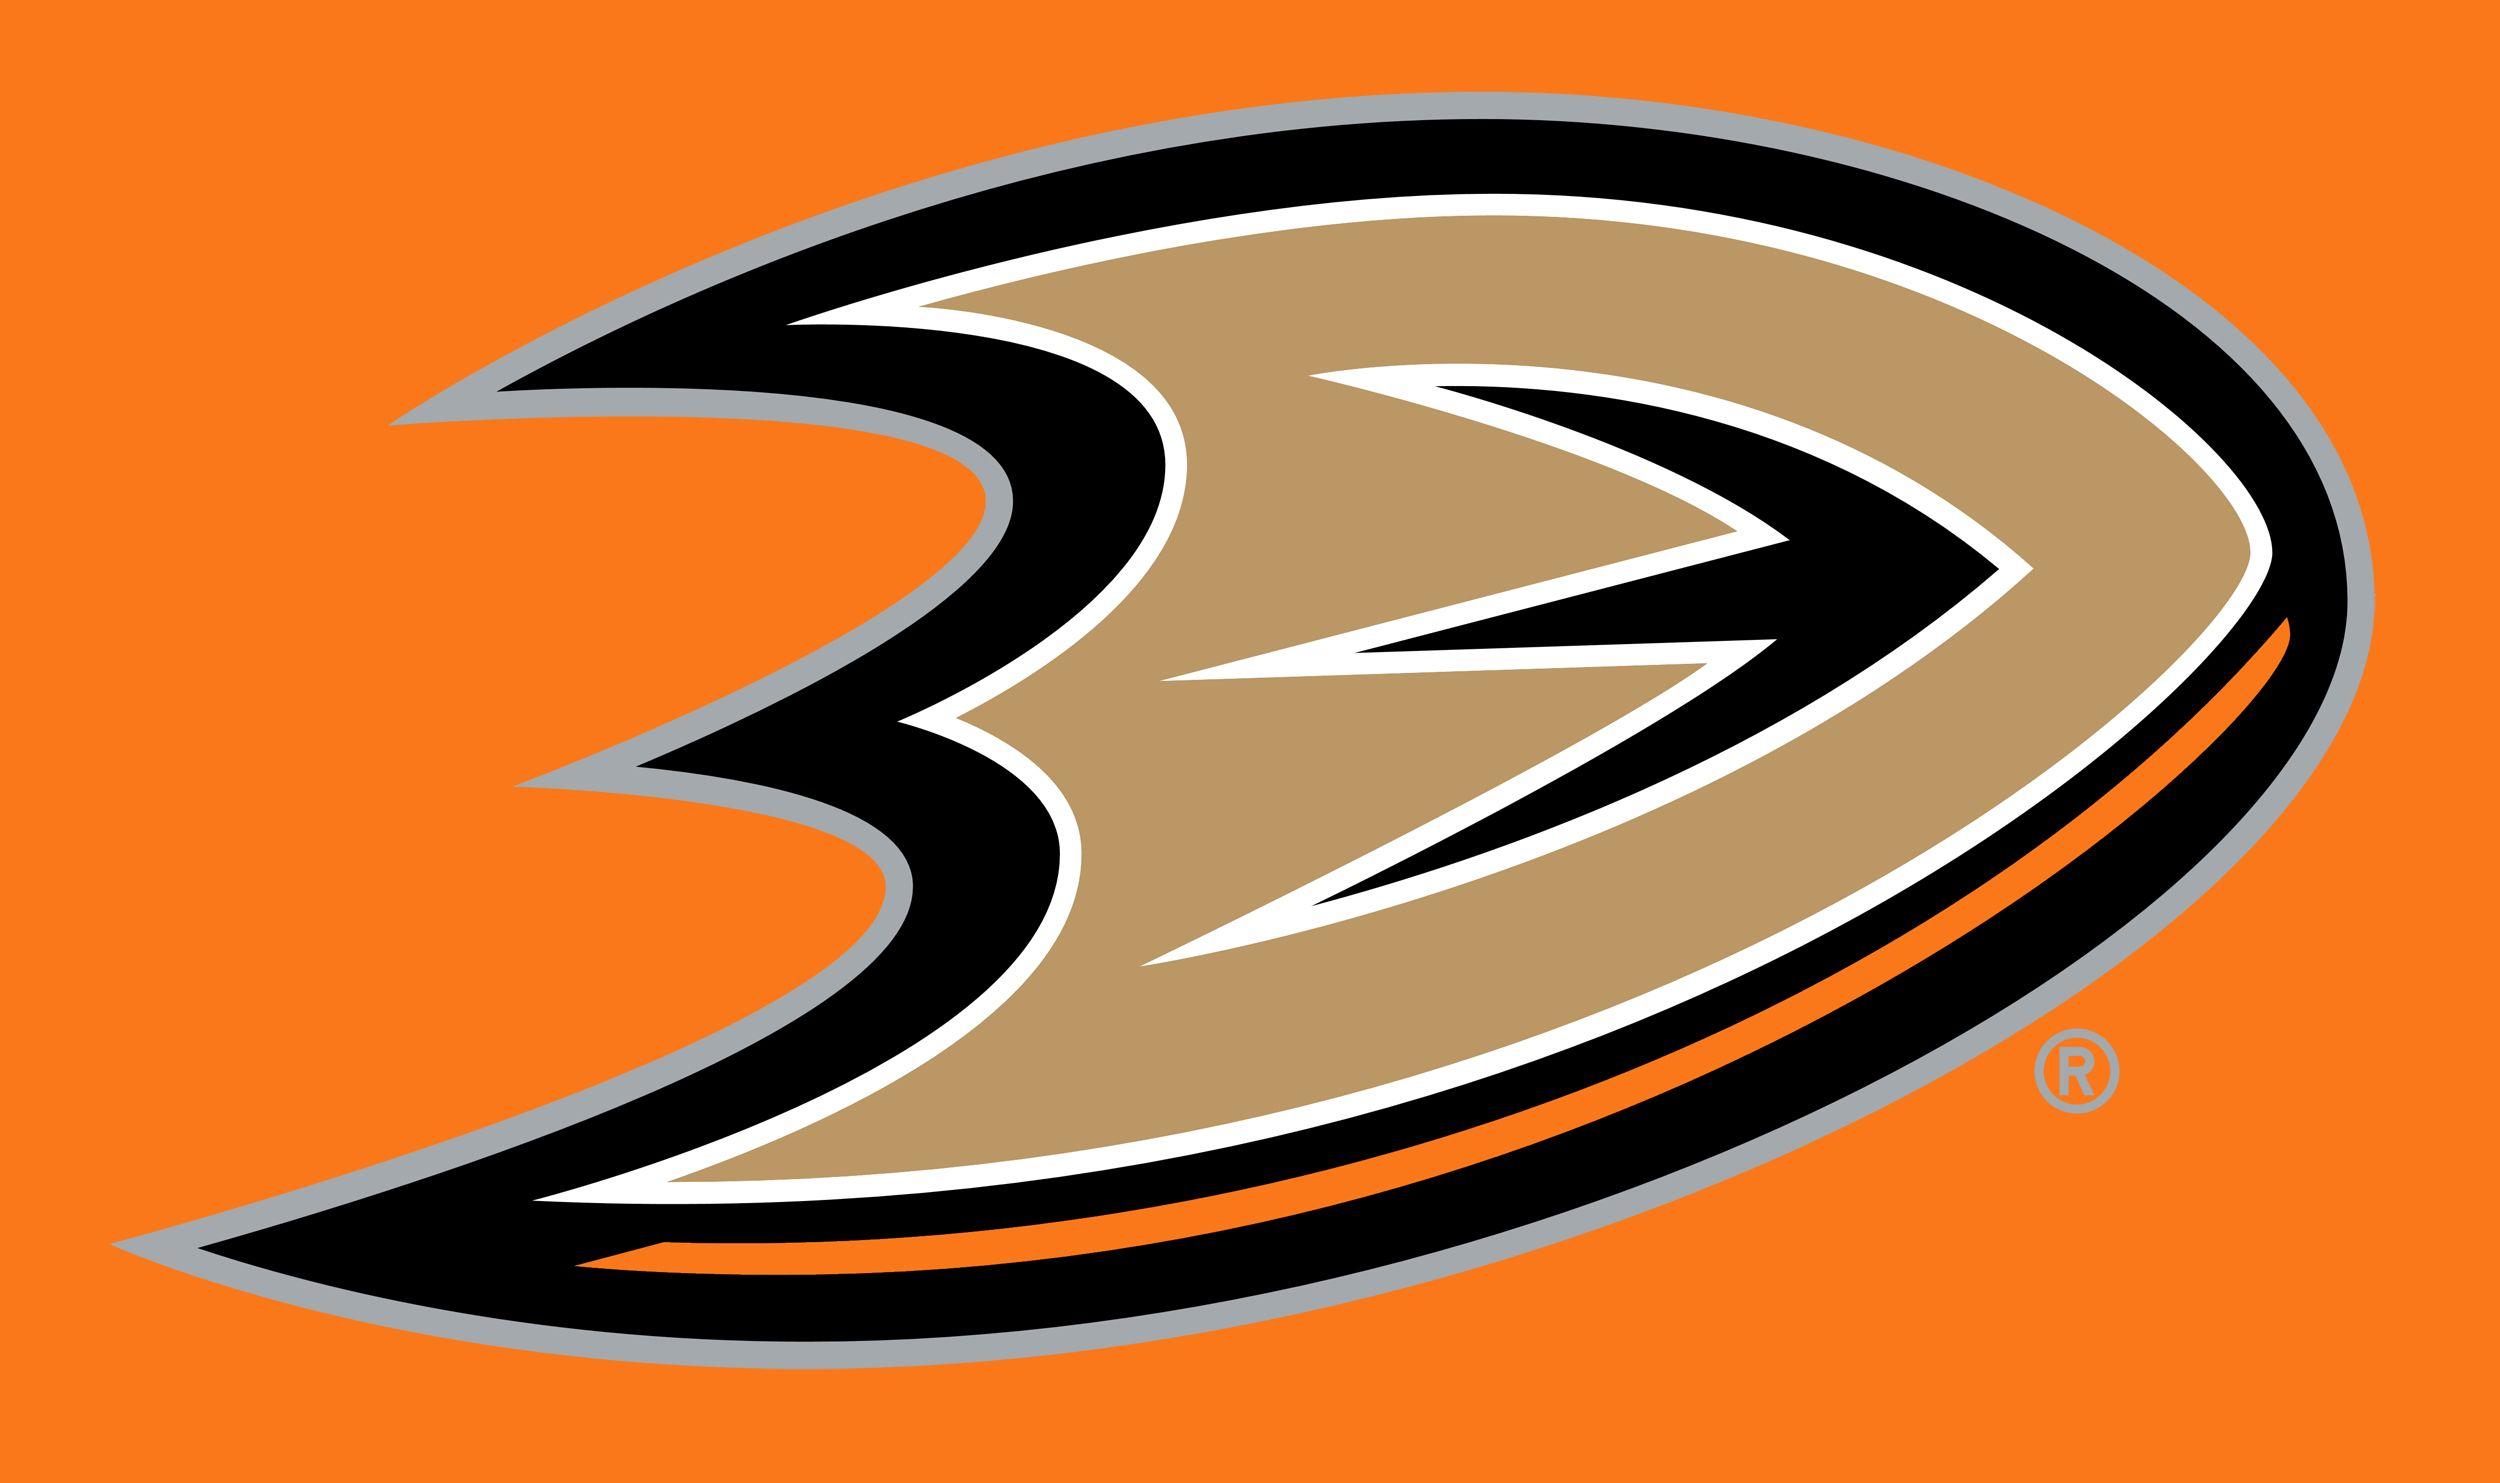 Anaheim Ducks Logo - Anaheim Ducks Logo, Anaheim Ducks Symbol, Meaning, History and Evolution